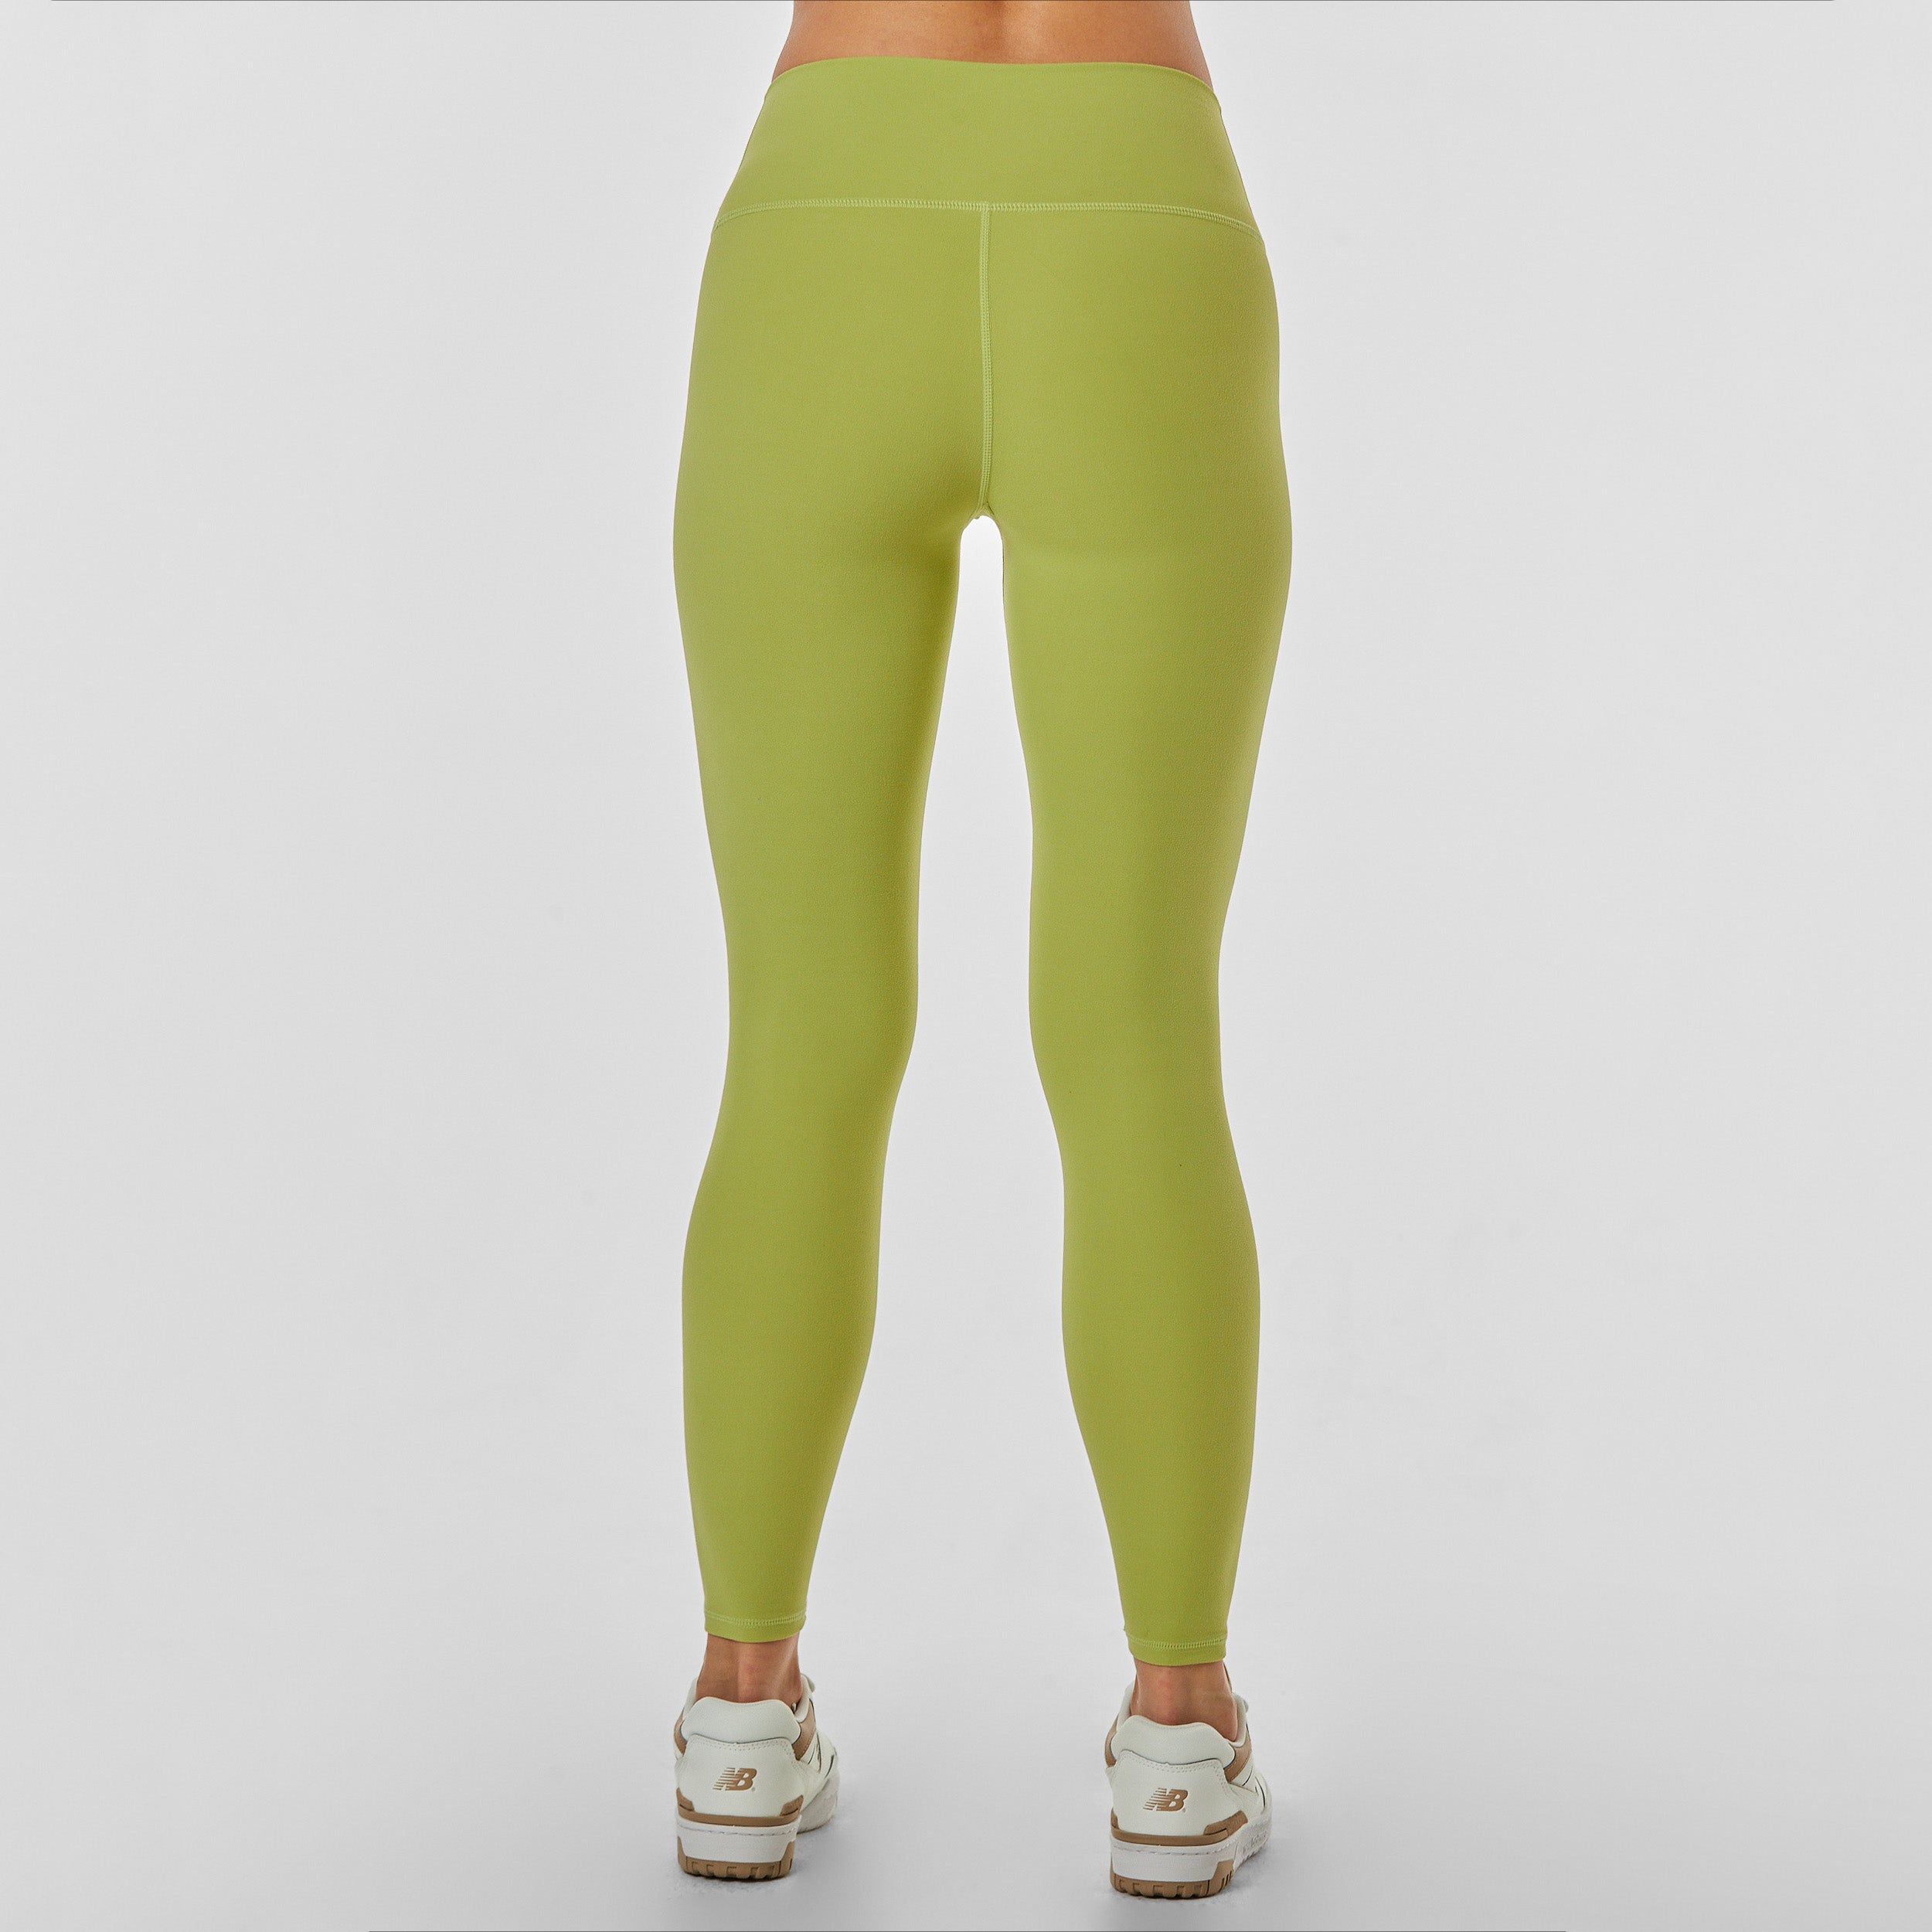 Rear view of woman wearing sculpting and flattering green legging